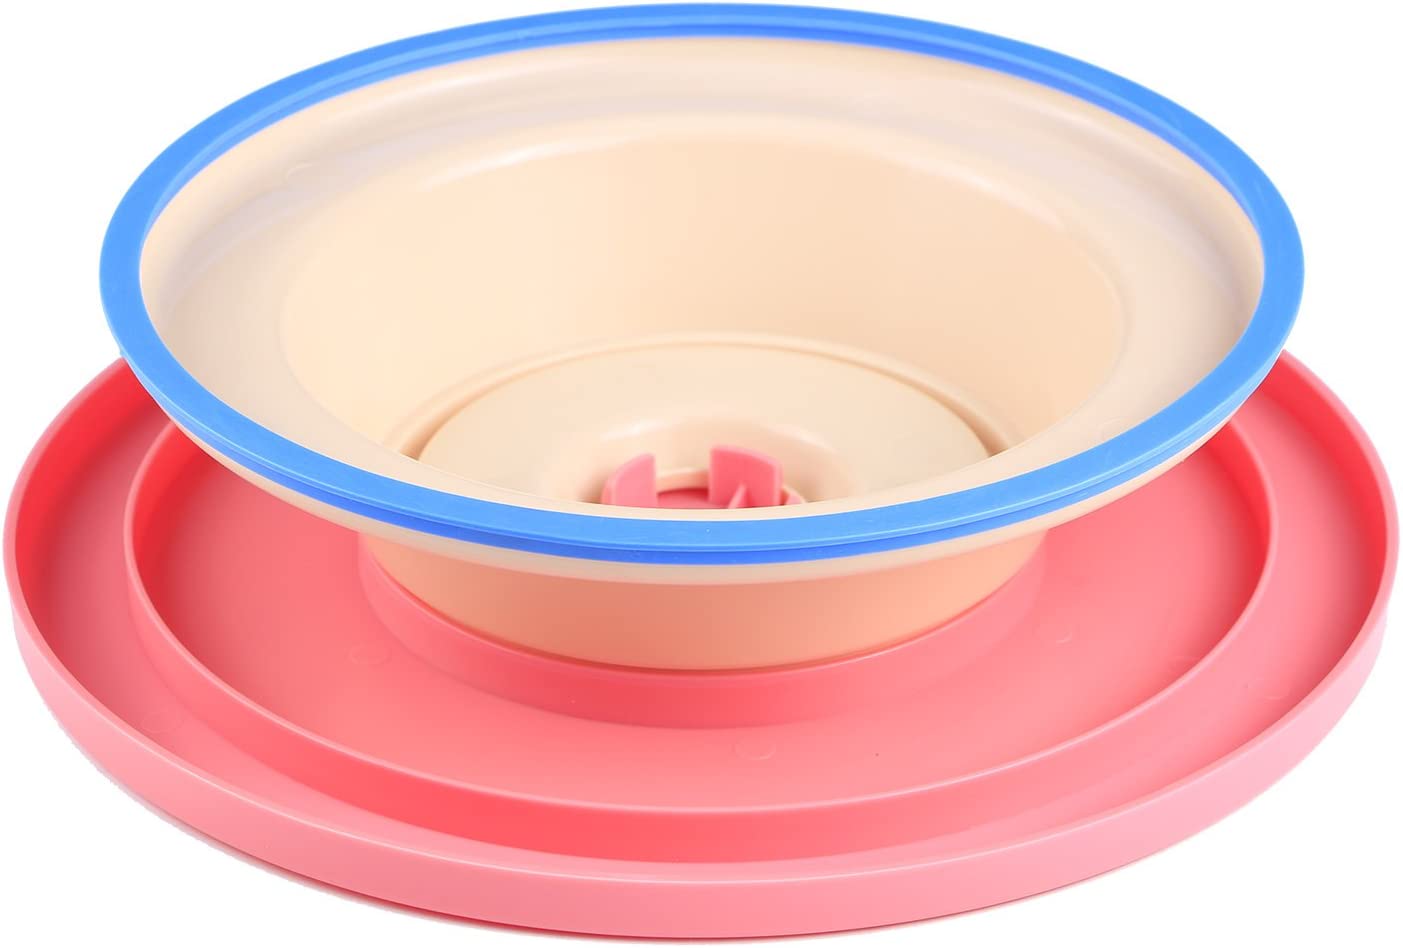 Webake Cake Turntable Non-Slip Rubber Band 11 Inch Rotating Cake Decorating Stand